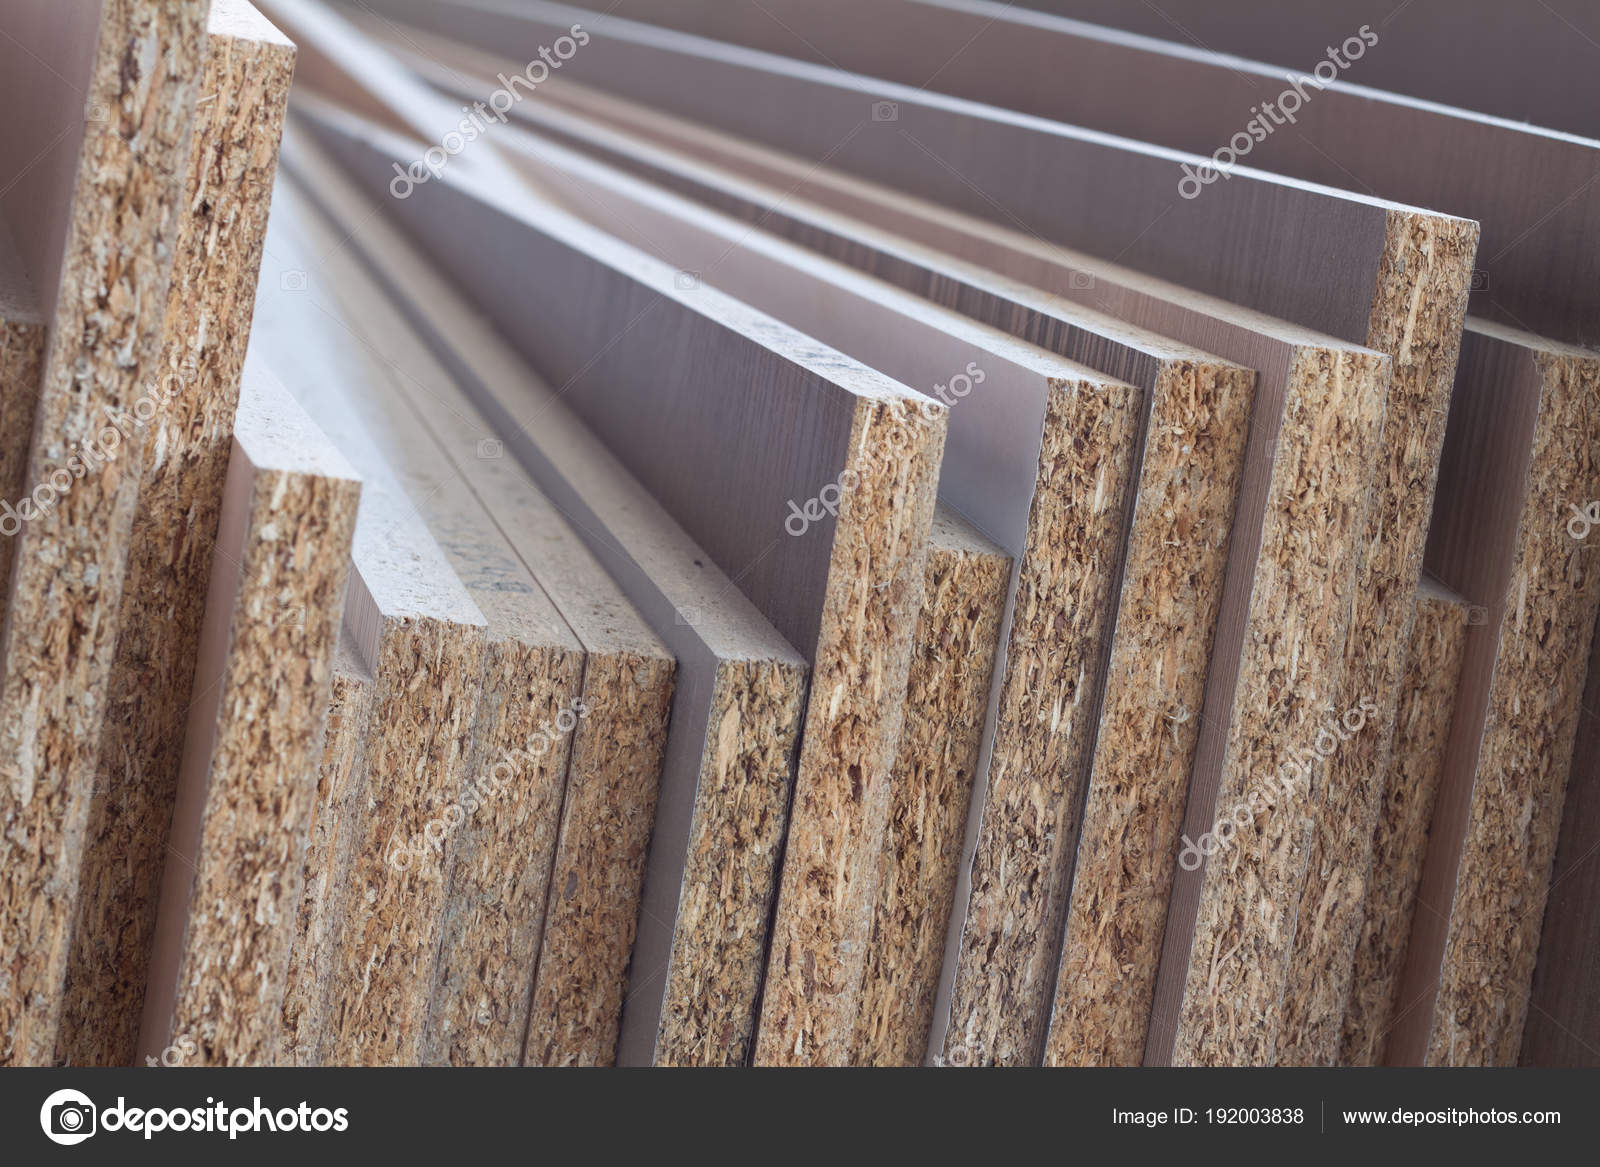 MDF, PARTICLE BOARD. Wood panels of different thicknesses and colors. — Stock Photo © Ramann